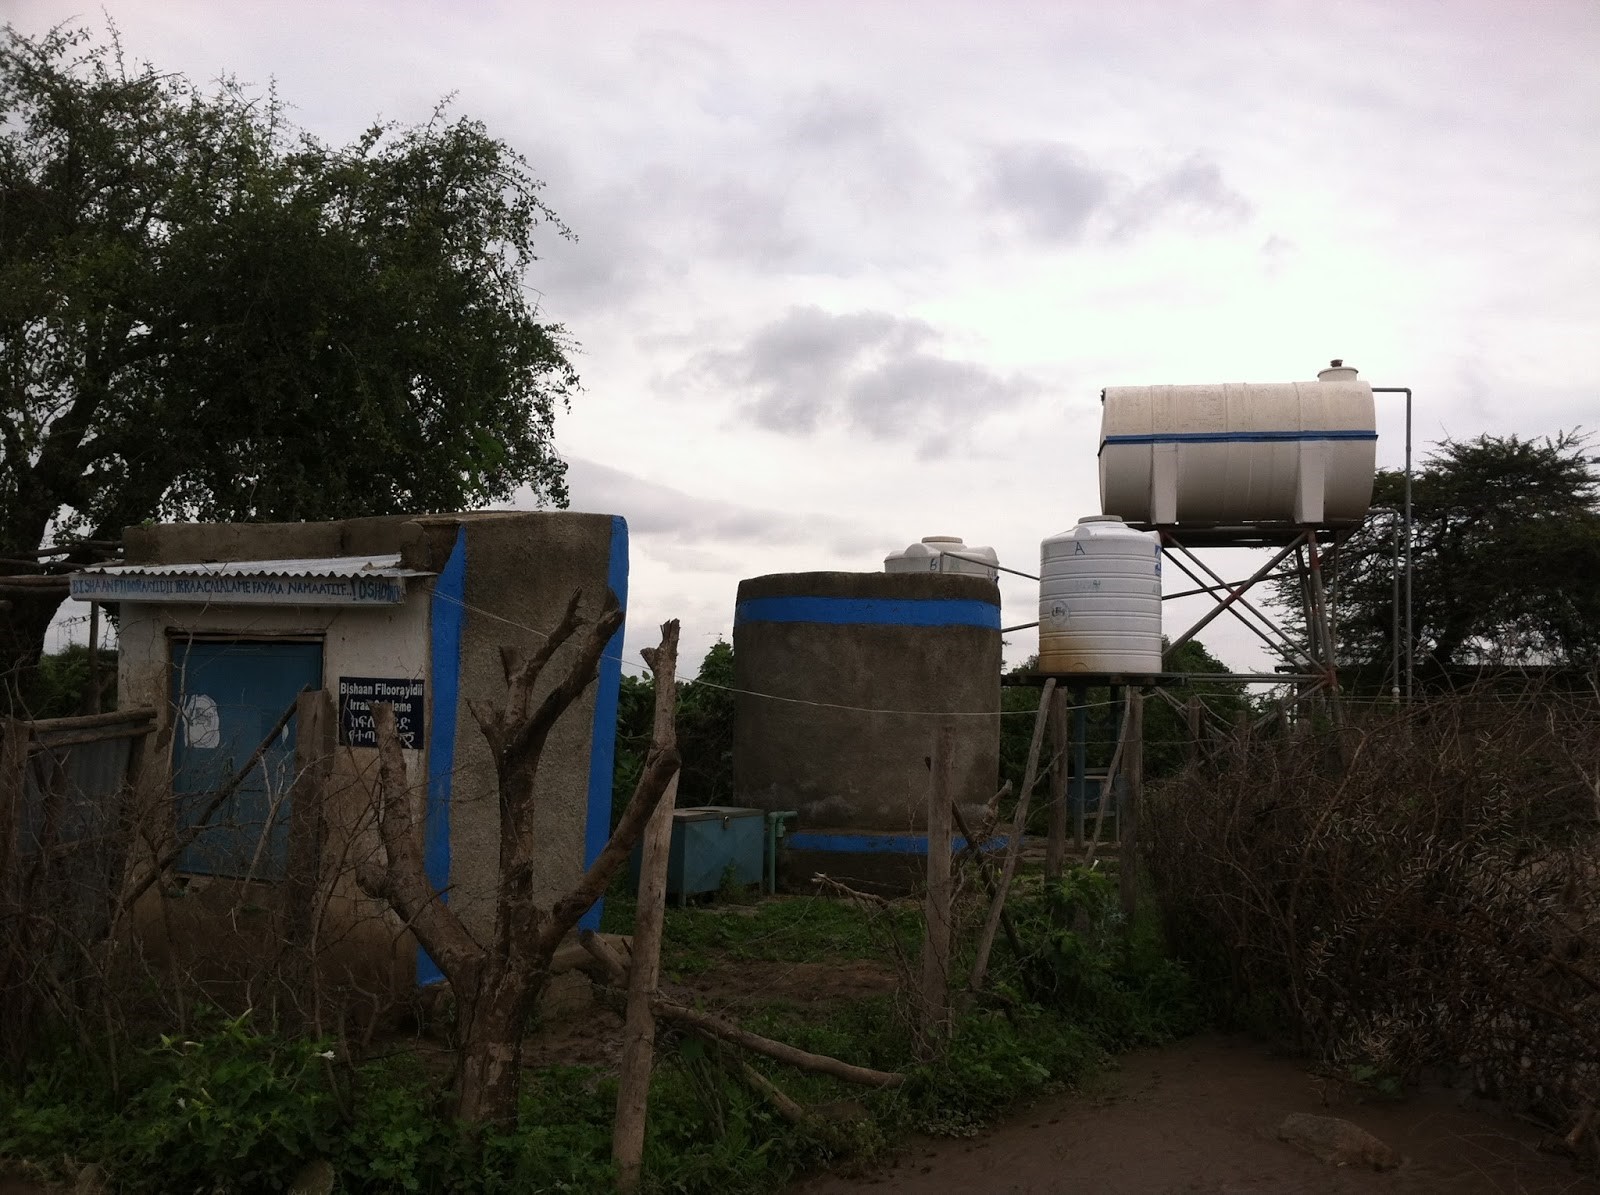 Fluoride filter system in Ethiopia. Source: OSHO (2014)